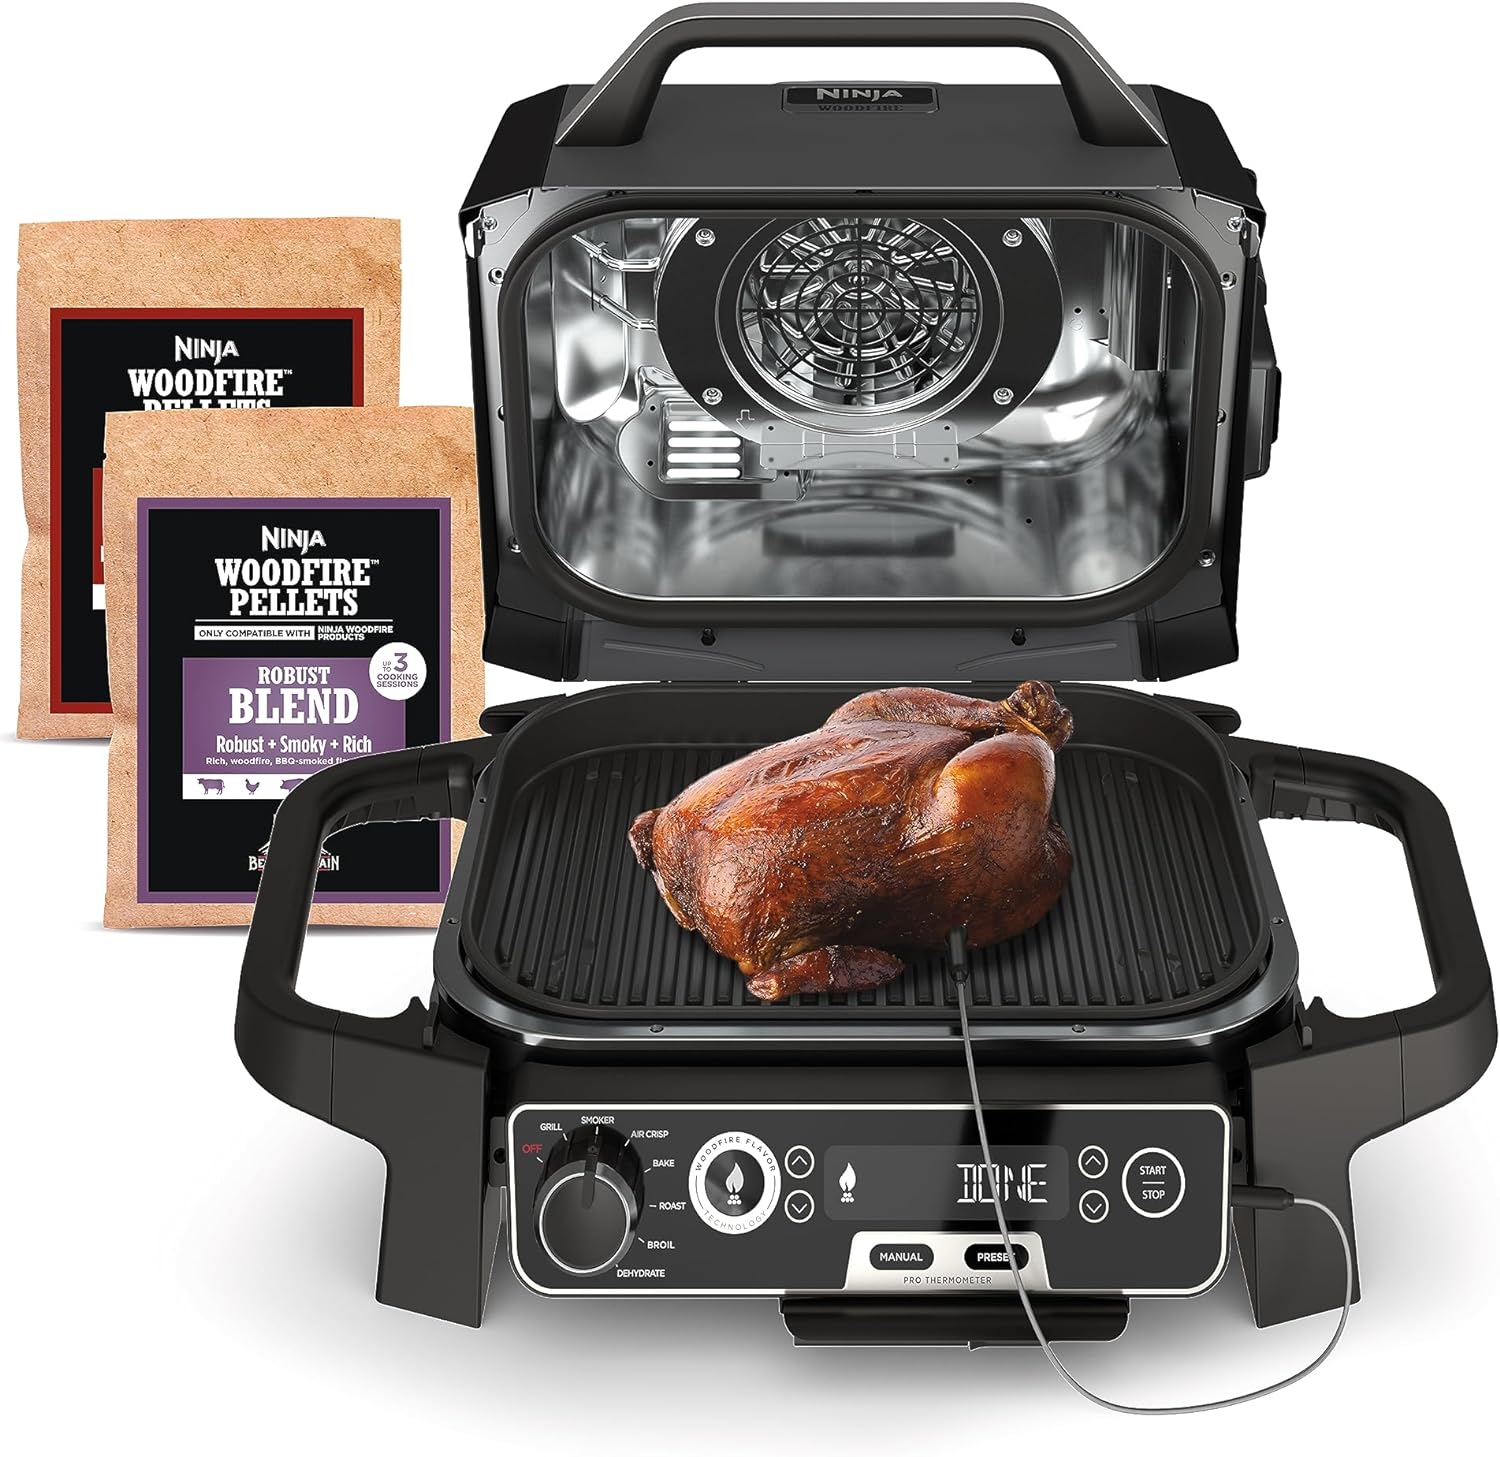 Ninja Woodfire Pro 7-in-1 Grill & Smoker With Thermometer Review